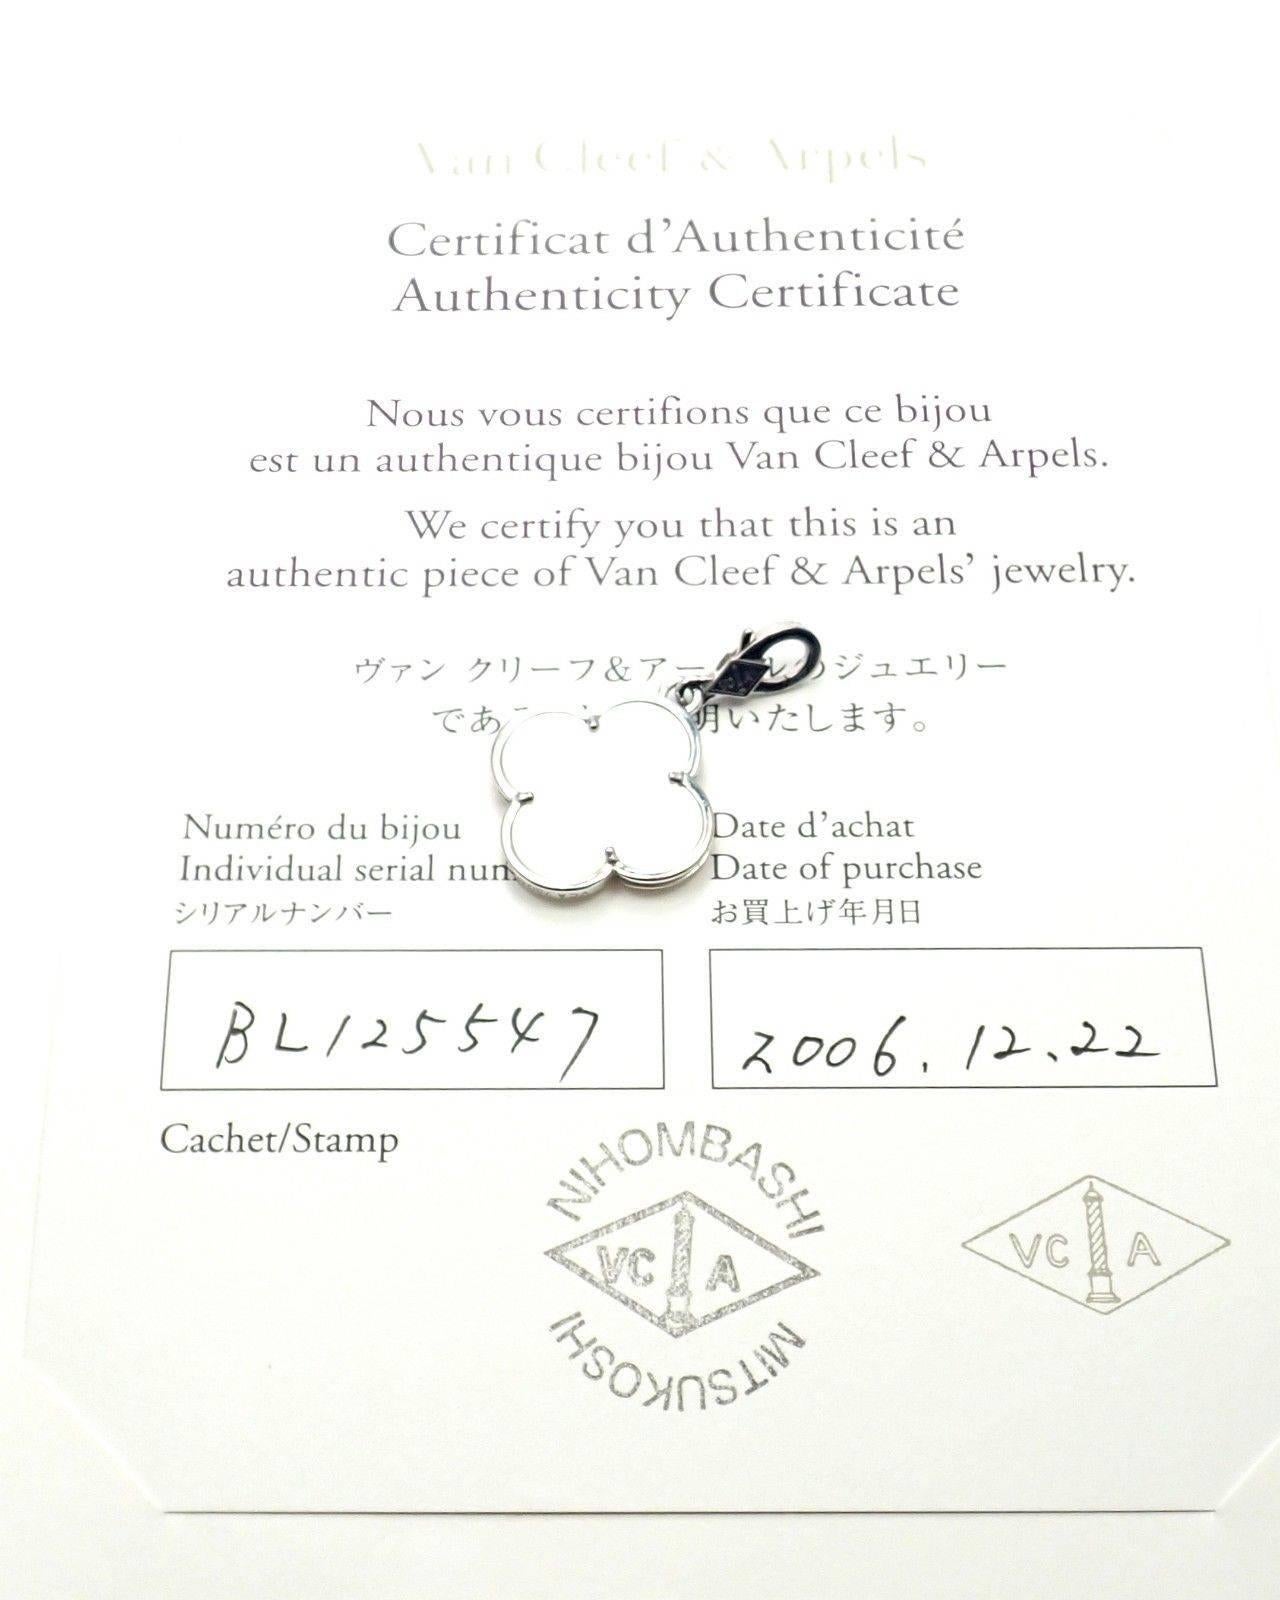 18k White Gold White Mother Of Pearl Large Magic Alhambra Pendant Charm by Van Cleef & Arpels.
With 1 large alhambra shape mother of pearl 21mm
This pendant comes with Van Cleef & Arpels certificate.
Details:
Measurements: 36mm x 22mm
Weight: 1.5